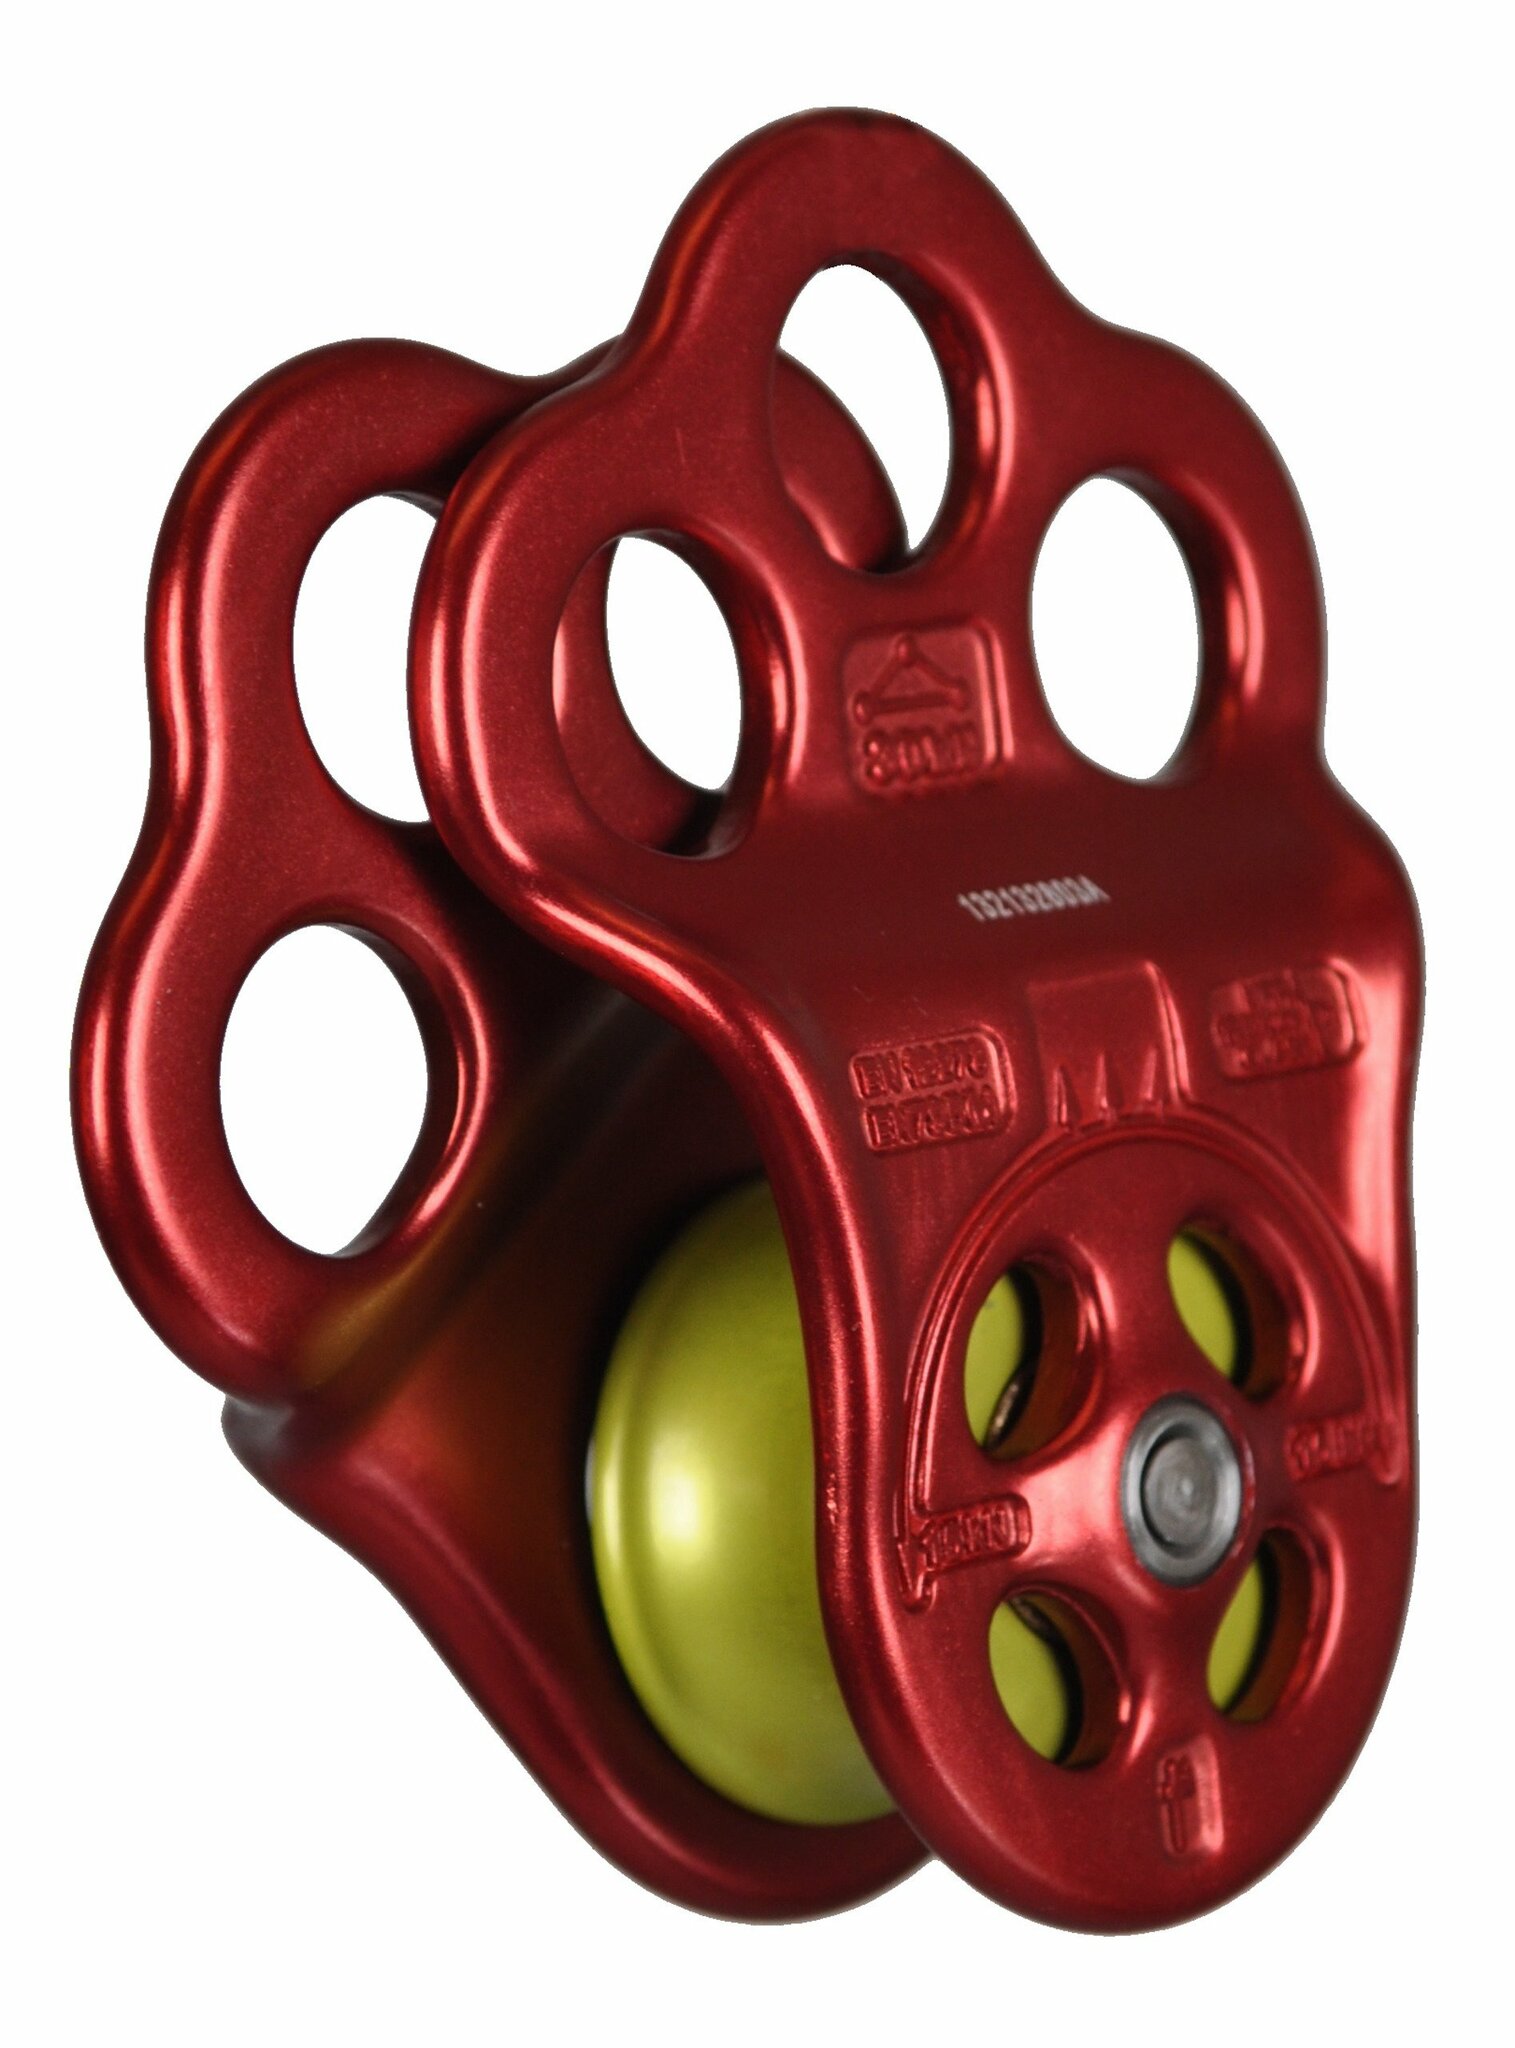 Hitch Climber Pulley - DMM